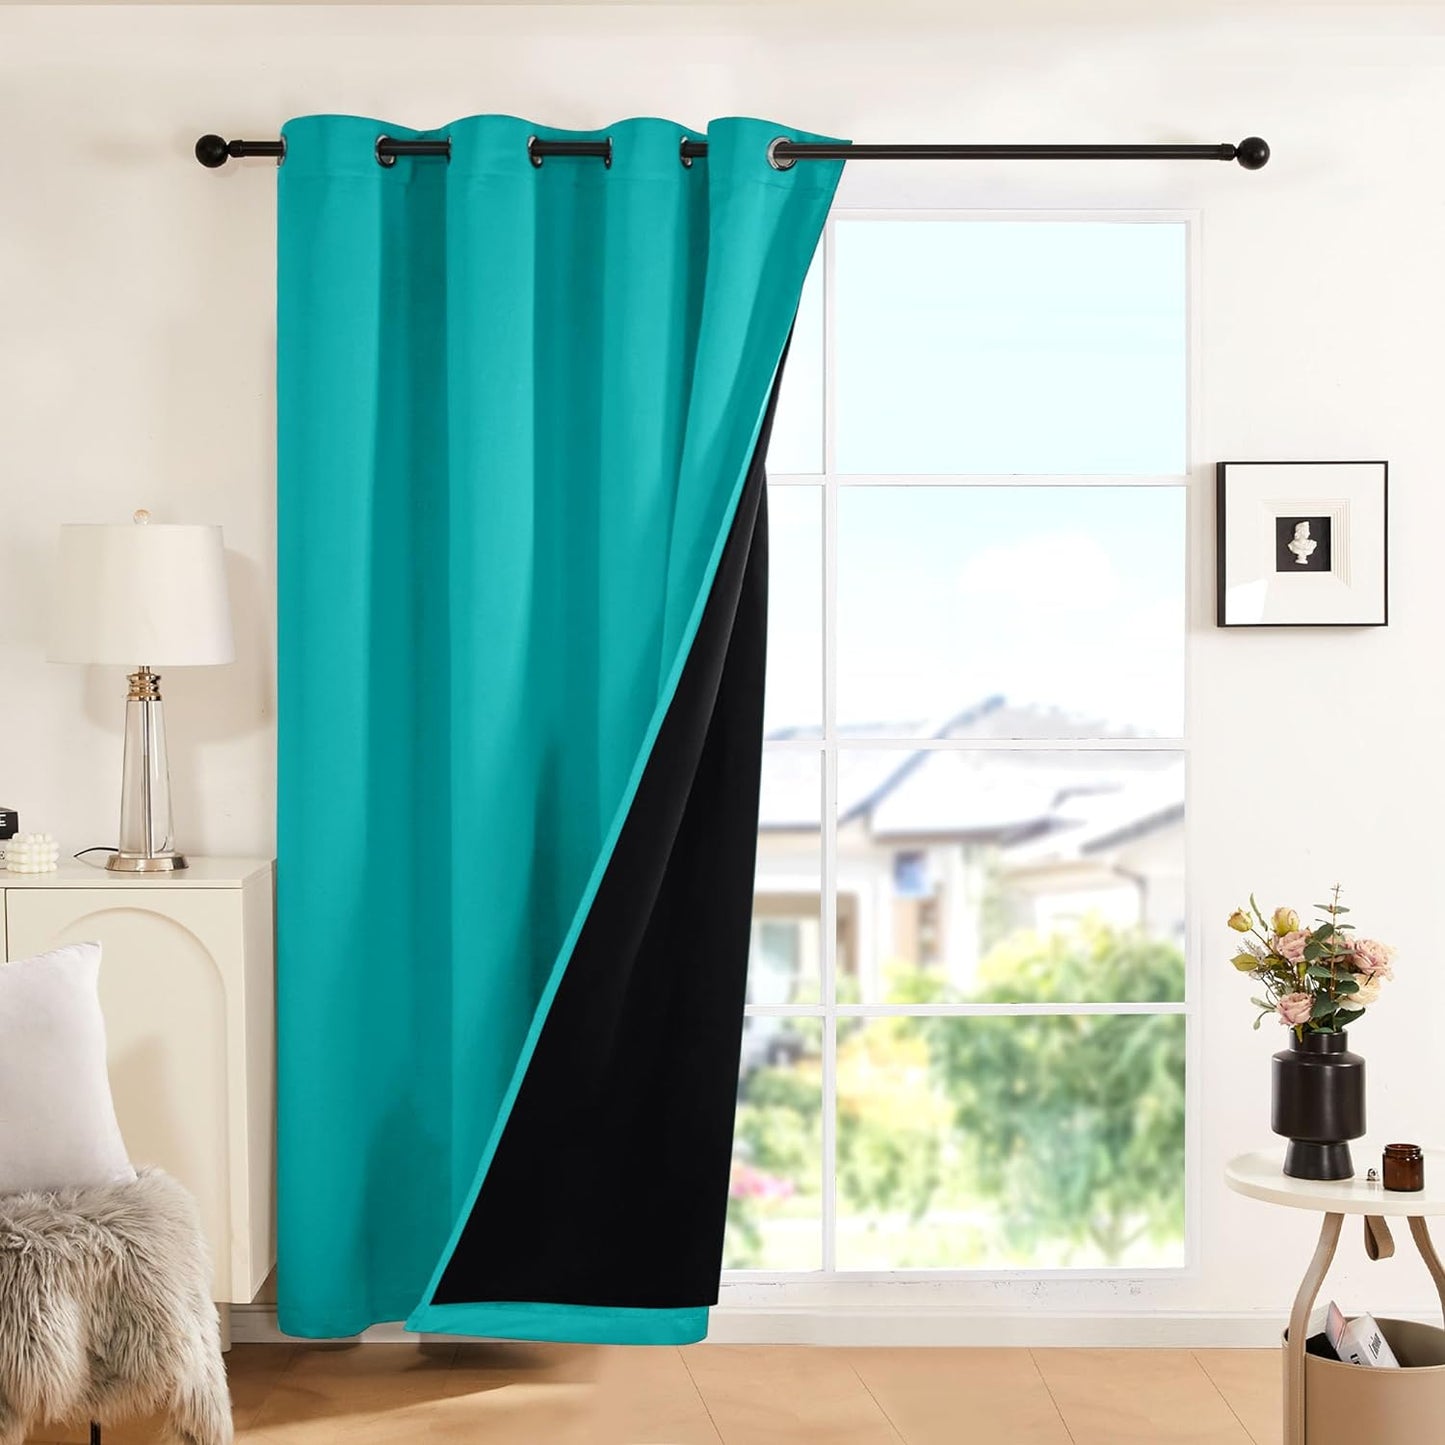 Deconovo 100% White Blackout Curtains, Double Layer Sliding Door Curtain for Living Room, Extra Wide Room Divder Curtains for Patio Door (100W X 84L Inches, Pure White, 1 Panel)  DECONOVO Teal Blue 52W X 84L Inch 